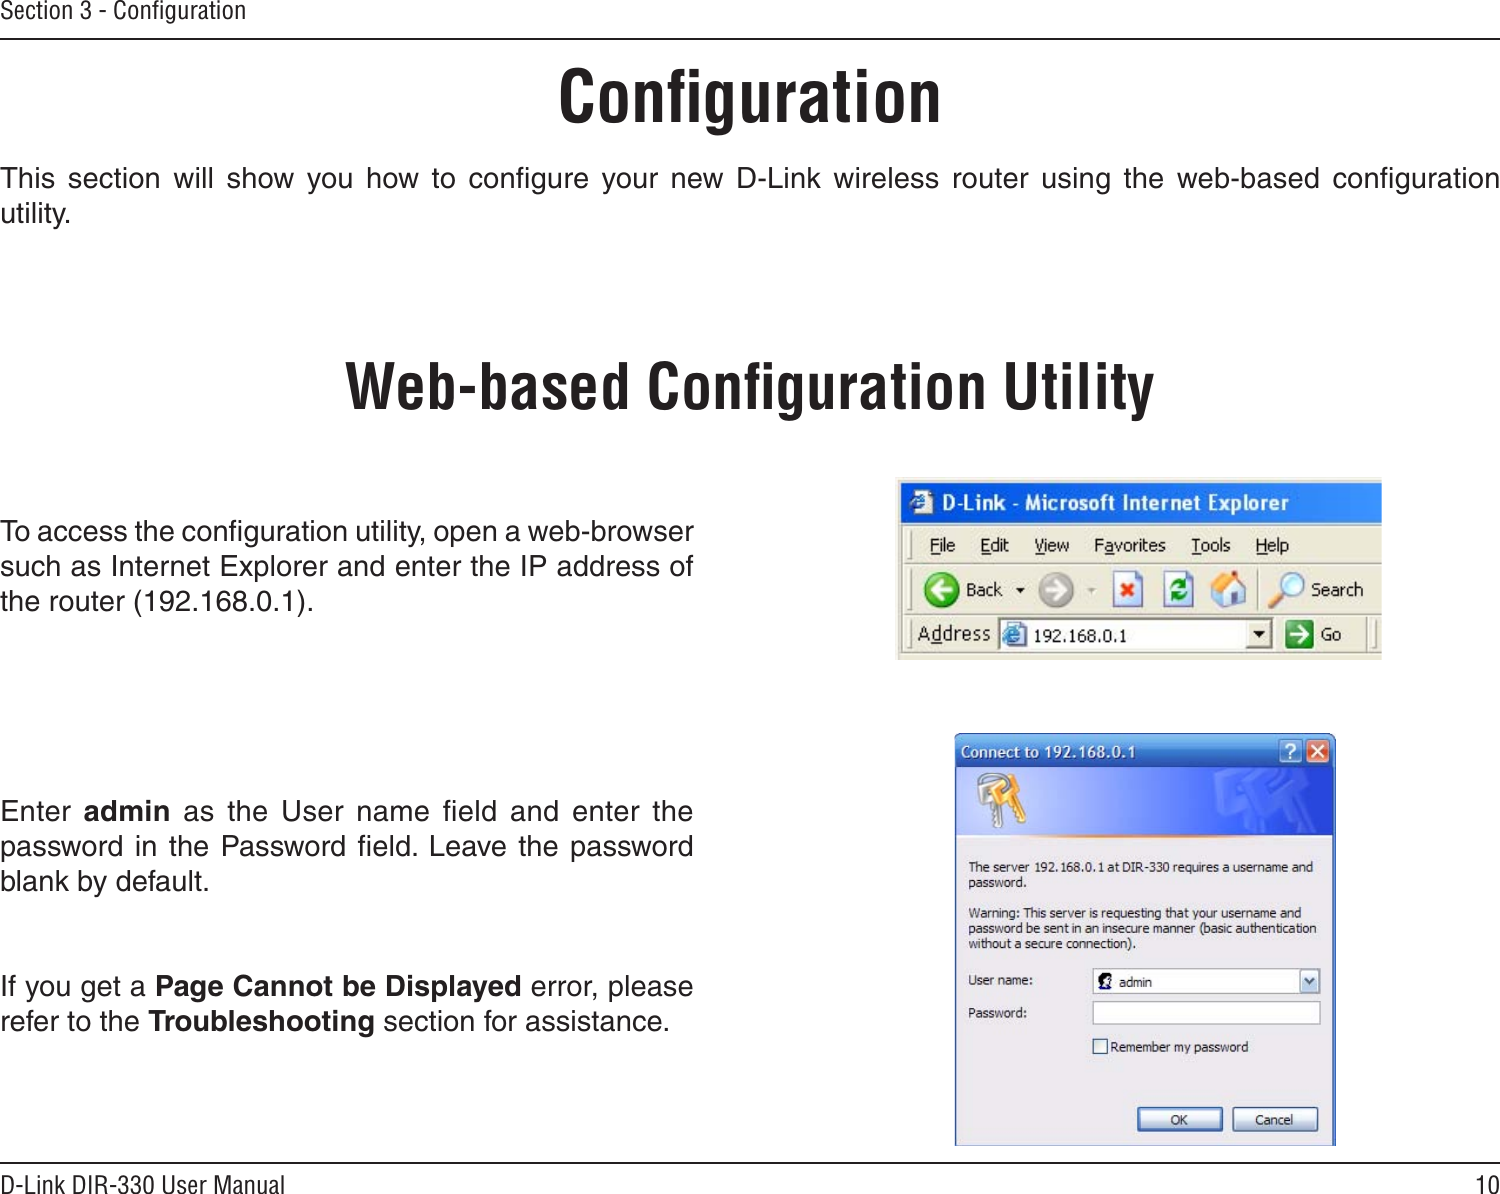 10D-Link DIR-330 User ManualSection 3 - ConﬁgurationConﬁgurationThis  section  will  show  you  how  to  conﬁgure  your  new  D-Link  wireless  router  using  the  web-based  conﬁguration utility.Web-based Conﬁguration UtilityTo access the conﬁguration utility, open a web-browser such as Internet Explorer and enter the IP address of the router (192.168.0.1).Enter  admin  as  the  User  name  ﬁeld  and  enter  the password in the Password  ﬁeld. Leave the password blank by default.If you get a Page Cannot be Displayed error, please refer to the Troubleshooting section for assistance.